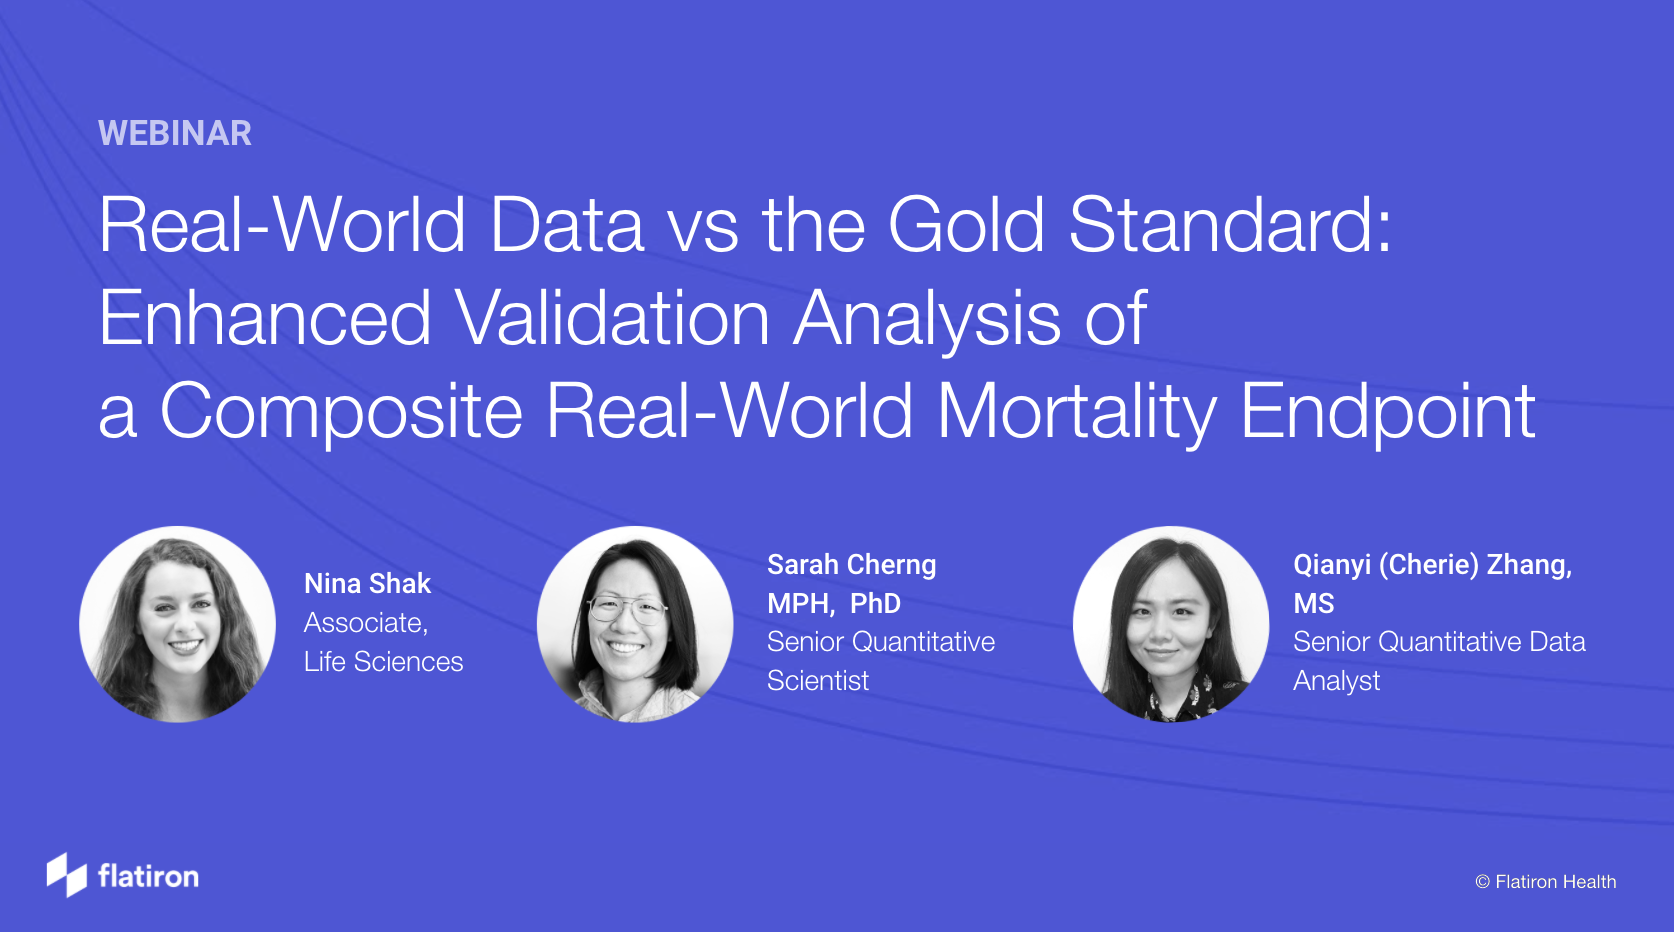 Real-world data vs the gold standard: enhanced validation analysis of a composite real-world mortality endpoint